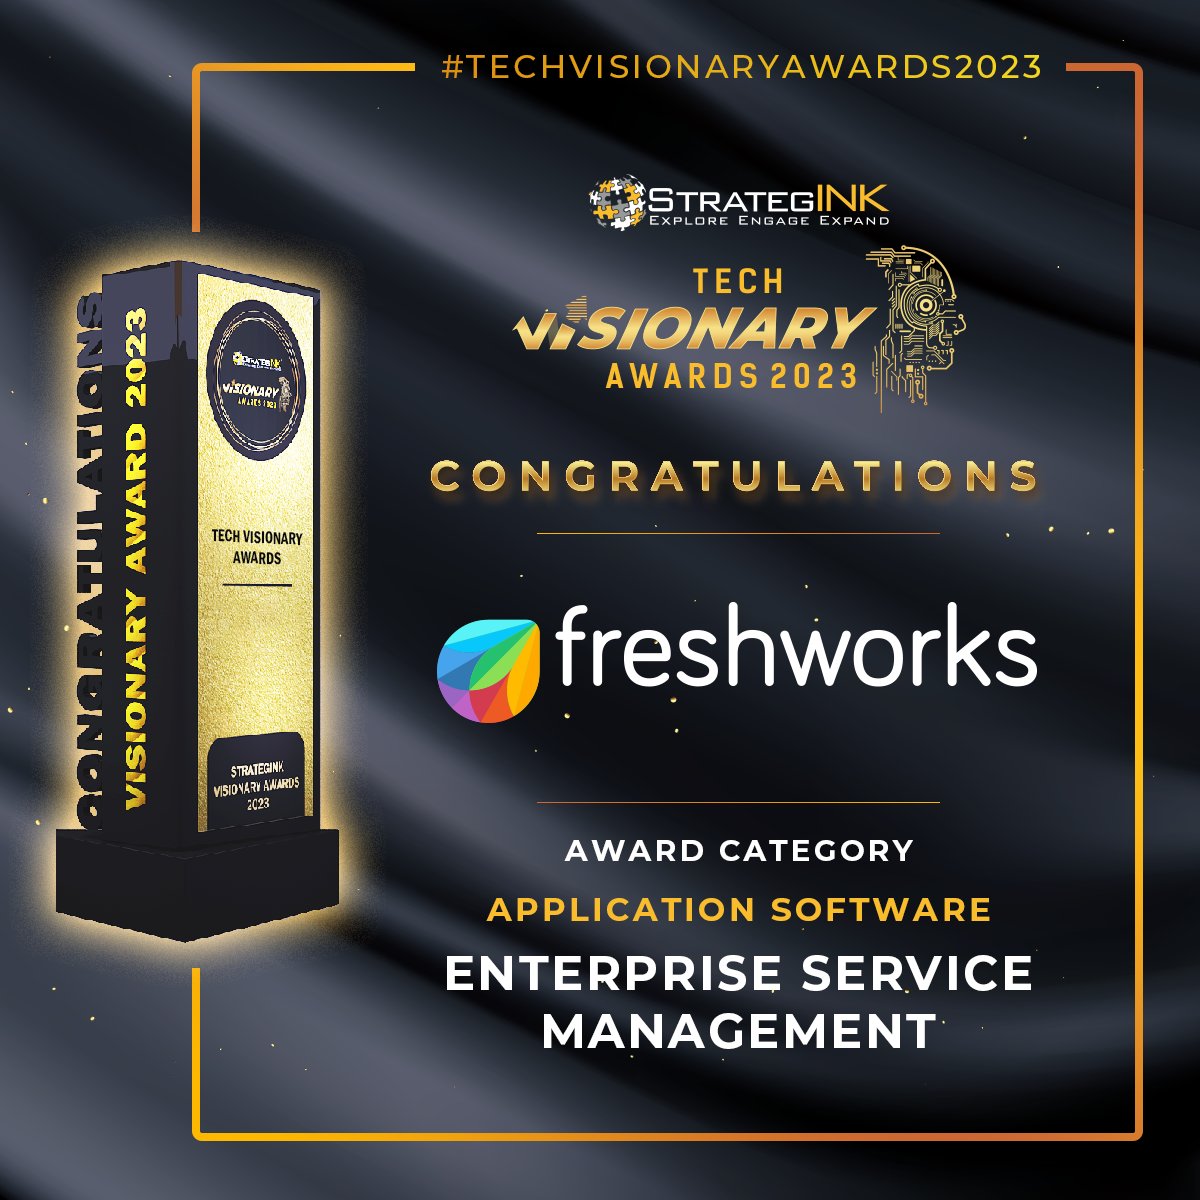 Let's hear it for #Freshworks on winning the award for #EnterpriseServiceManagement under the Application Software Category at the Tech Visionary Awards 2023.

Team StrategINK Rejoices in this victory!

#TechVisionaryAwards #StrategINK #Awards #Human #Capital #management